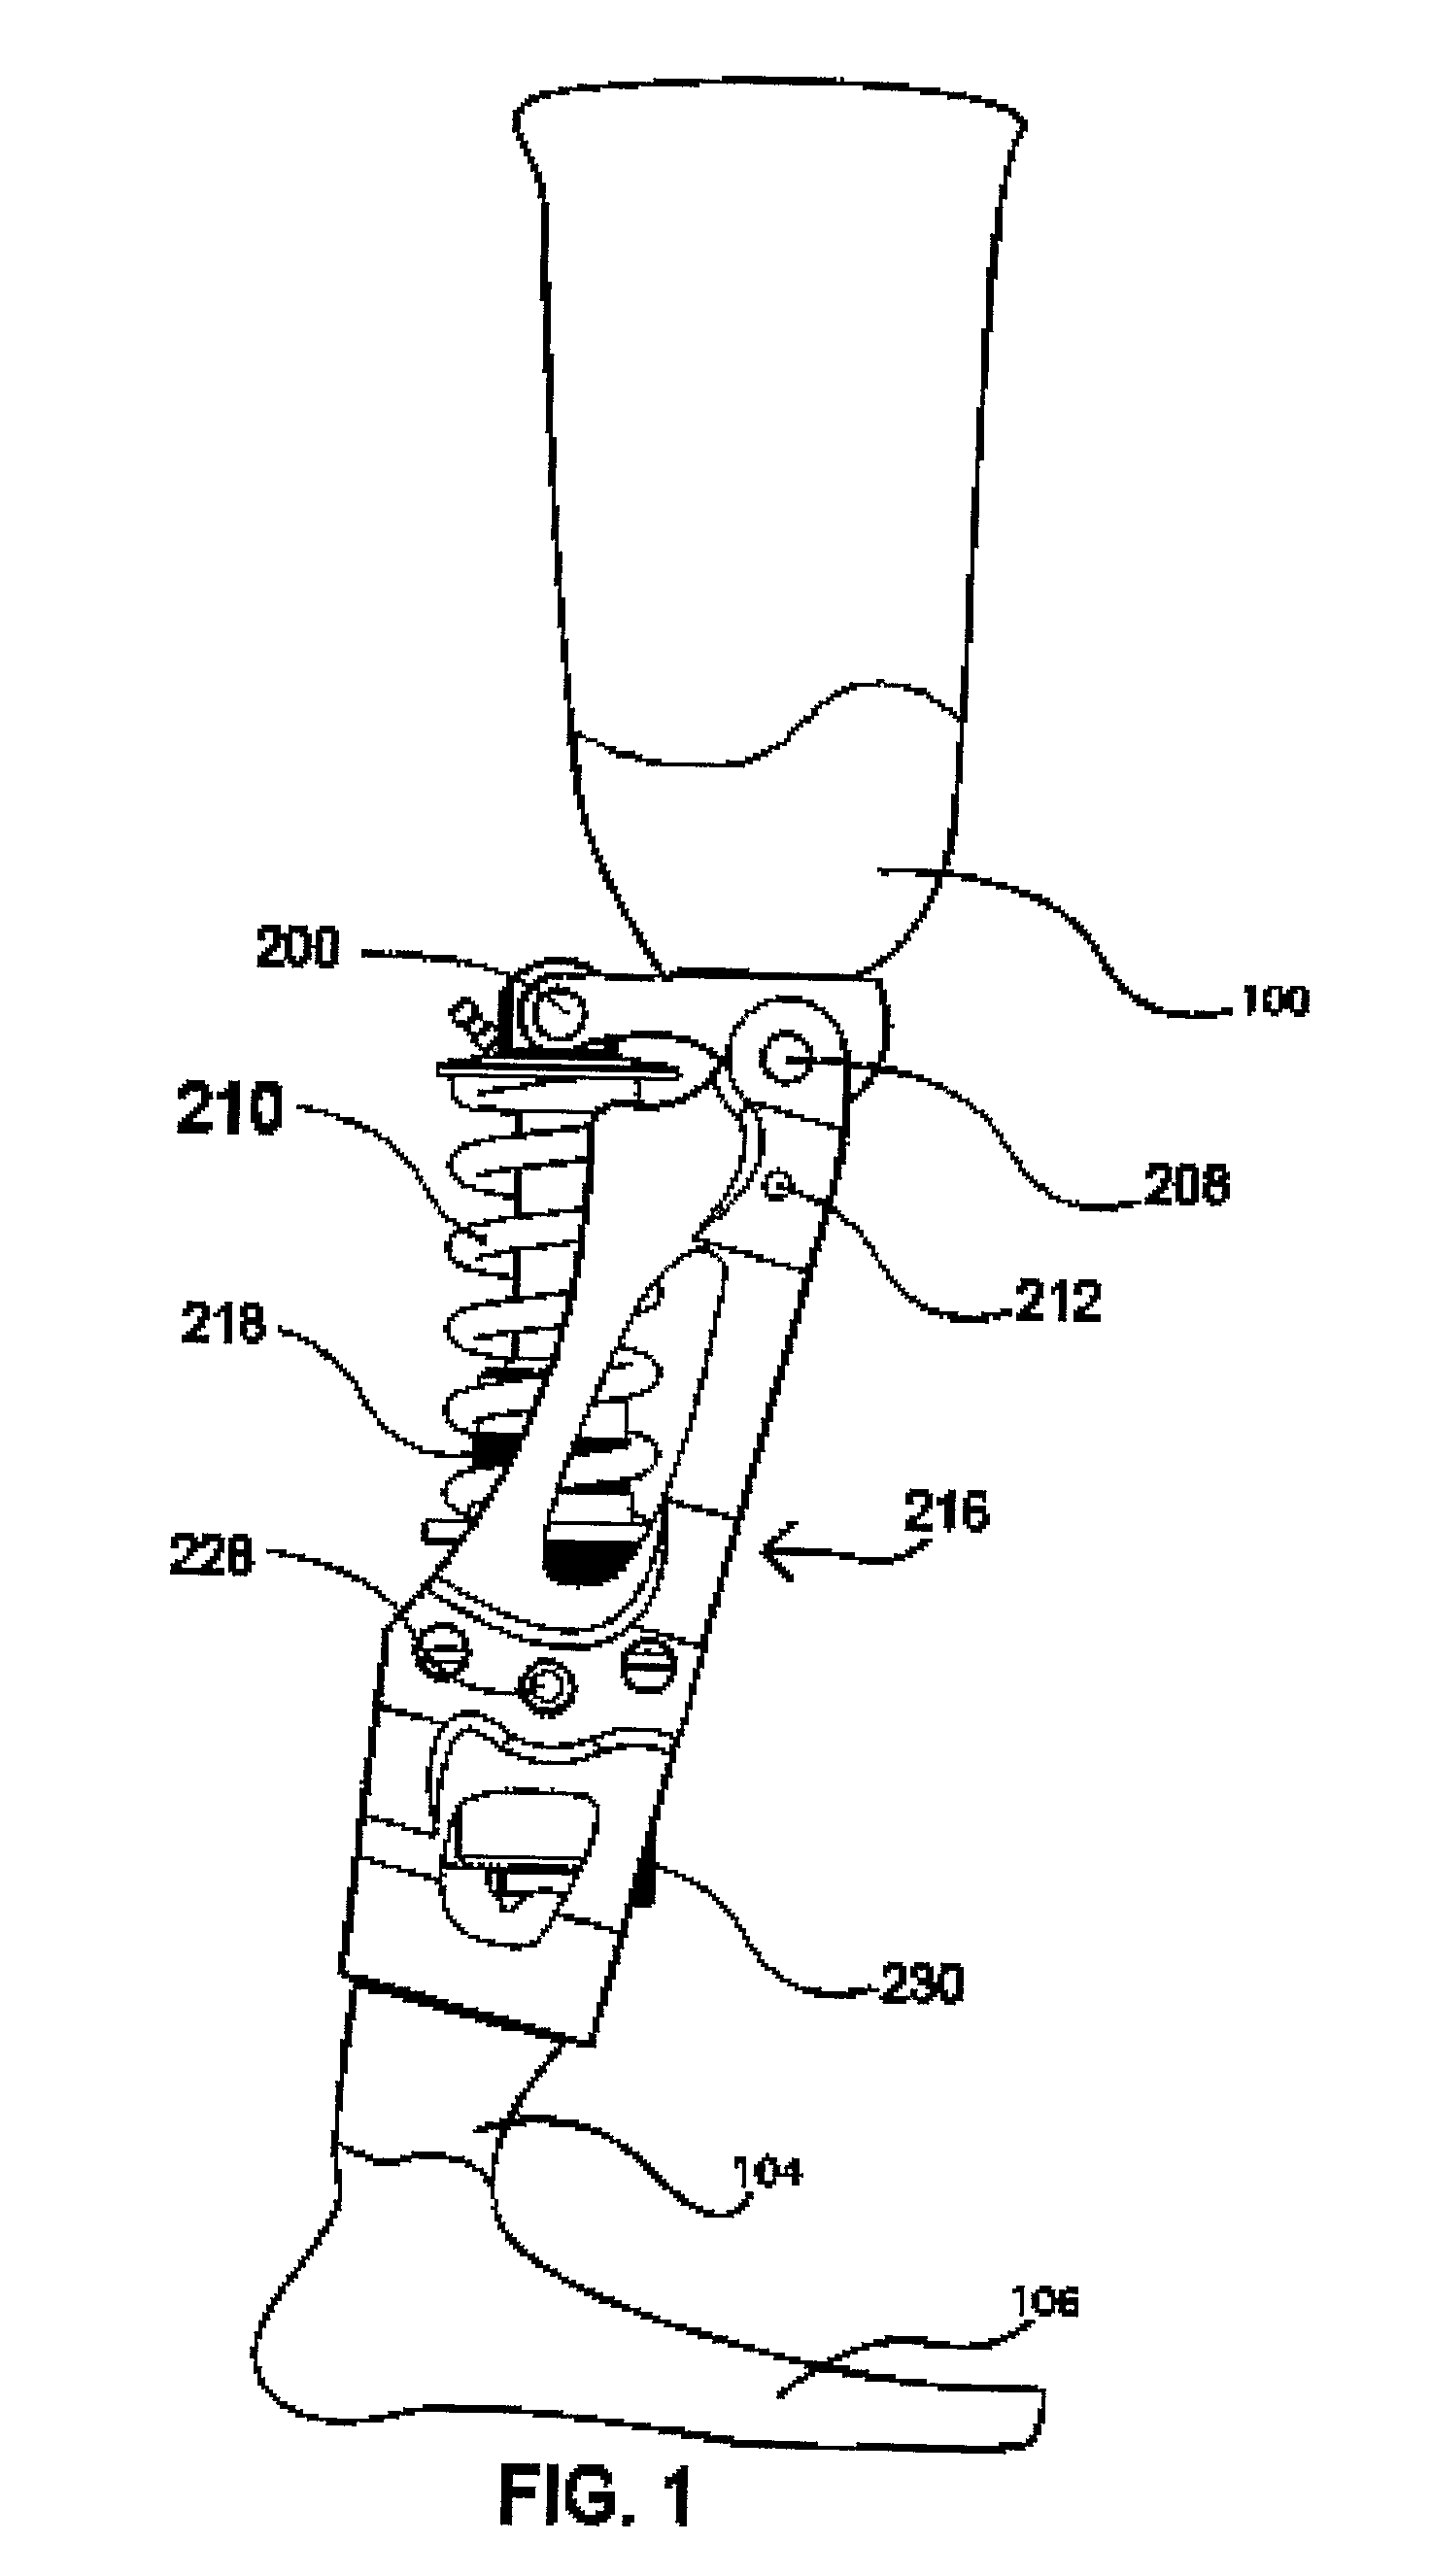 Prosthetic knee and leg assembly for use in athletic activities in which the quadriceps are normally used for support and dynamic function